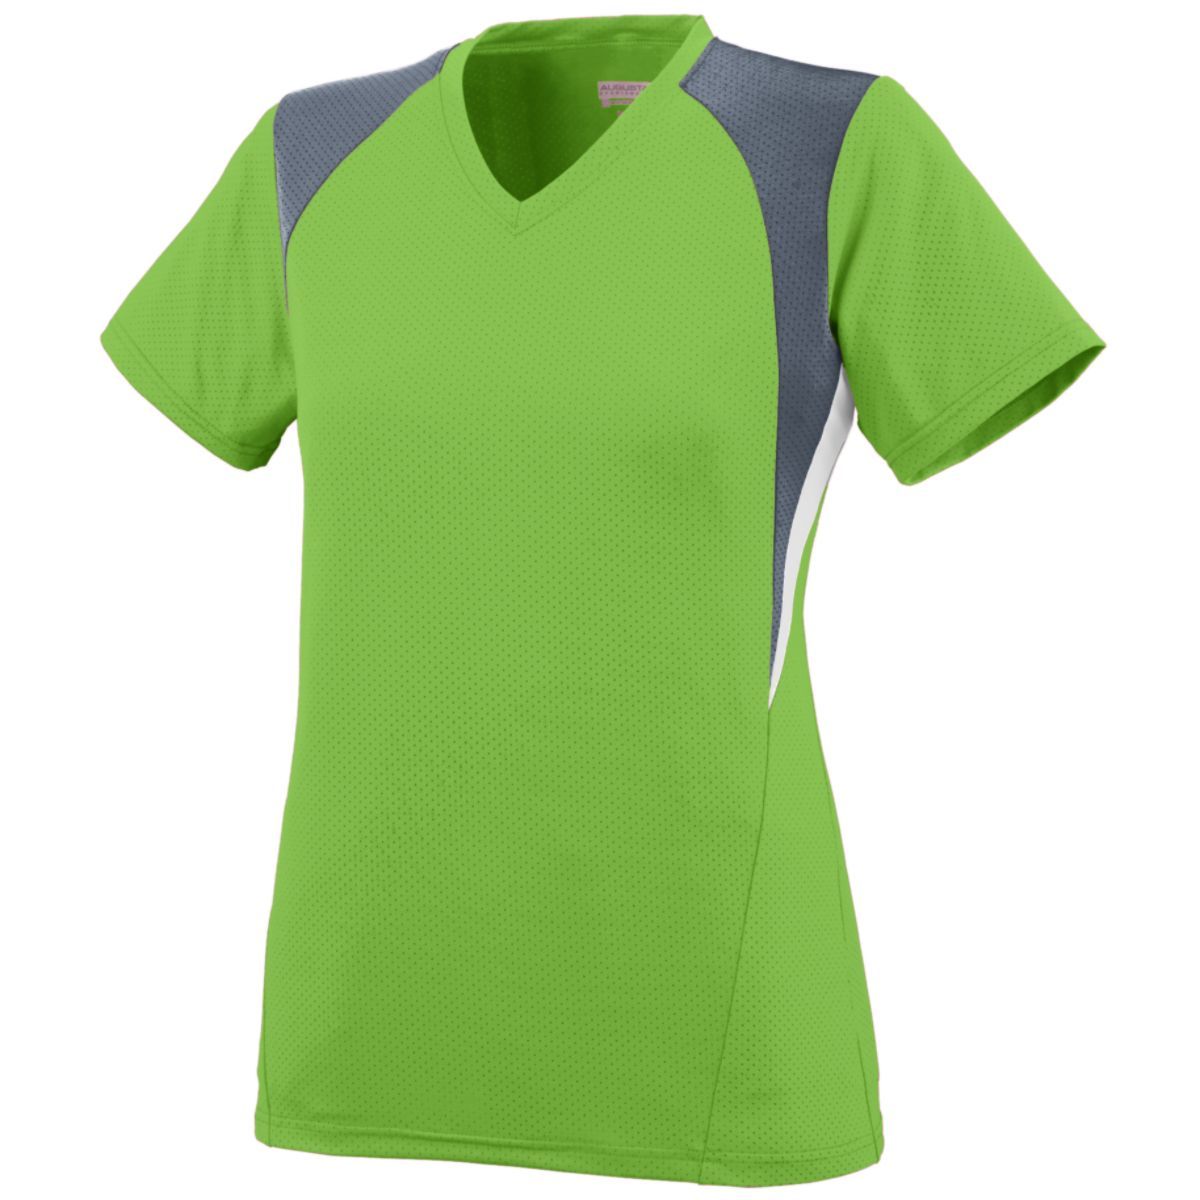 Augusta Sportswear Ladies Mystic Jersey in Lime/Graphite/White  -Part of the Ladies, Ladies-Jersey, Augusta-Products, Soccer, Shirts, All-Sports-1 product lines at KanaleyCreations.com